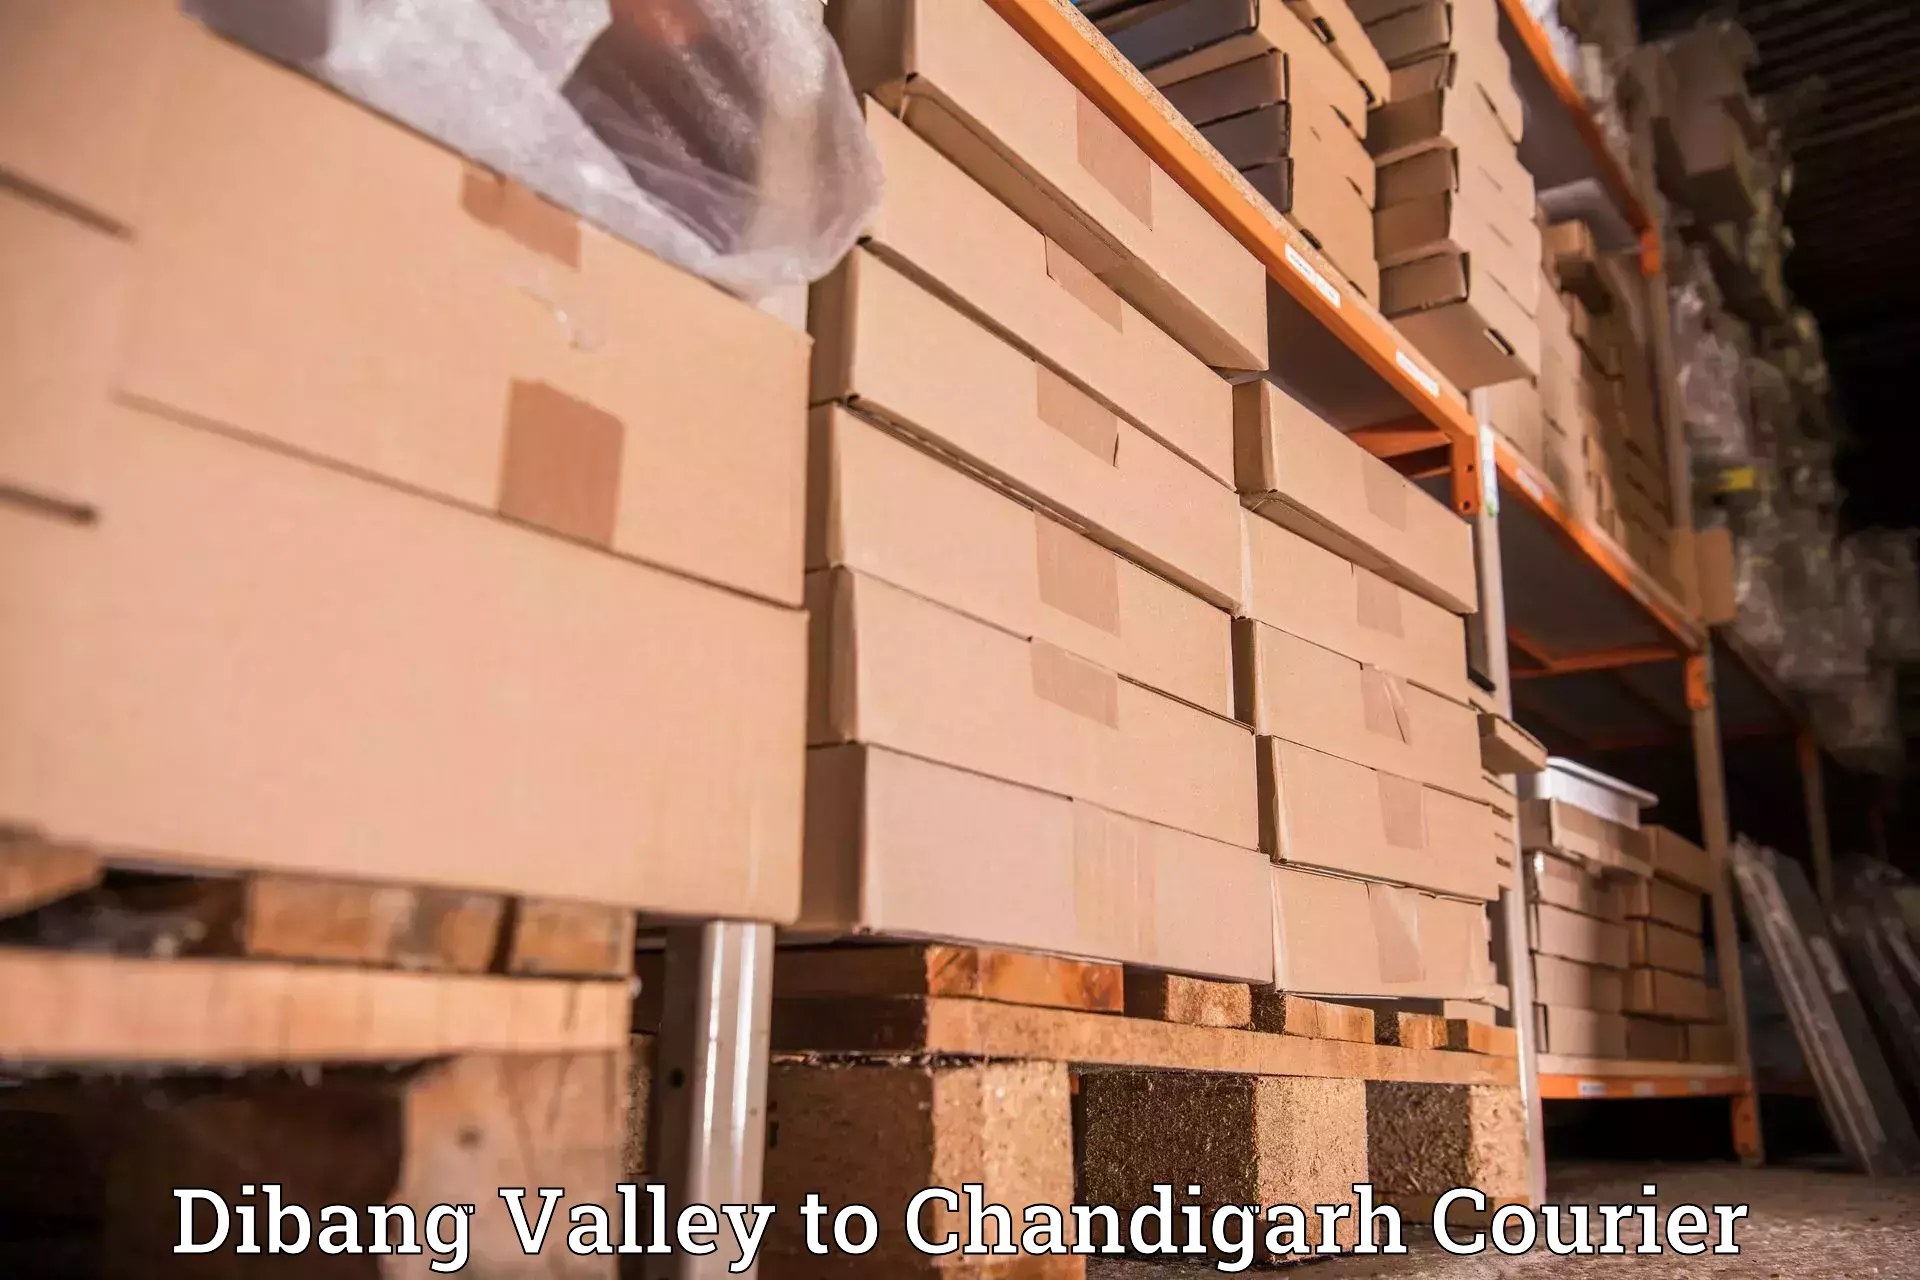 Subscription-based courier Dibang Valley to Chandigarh